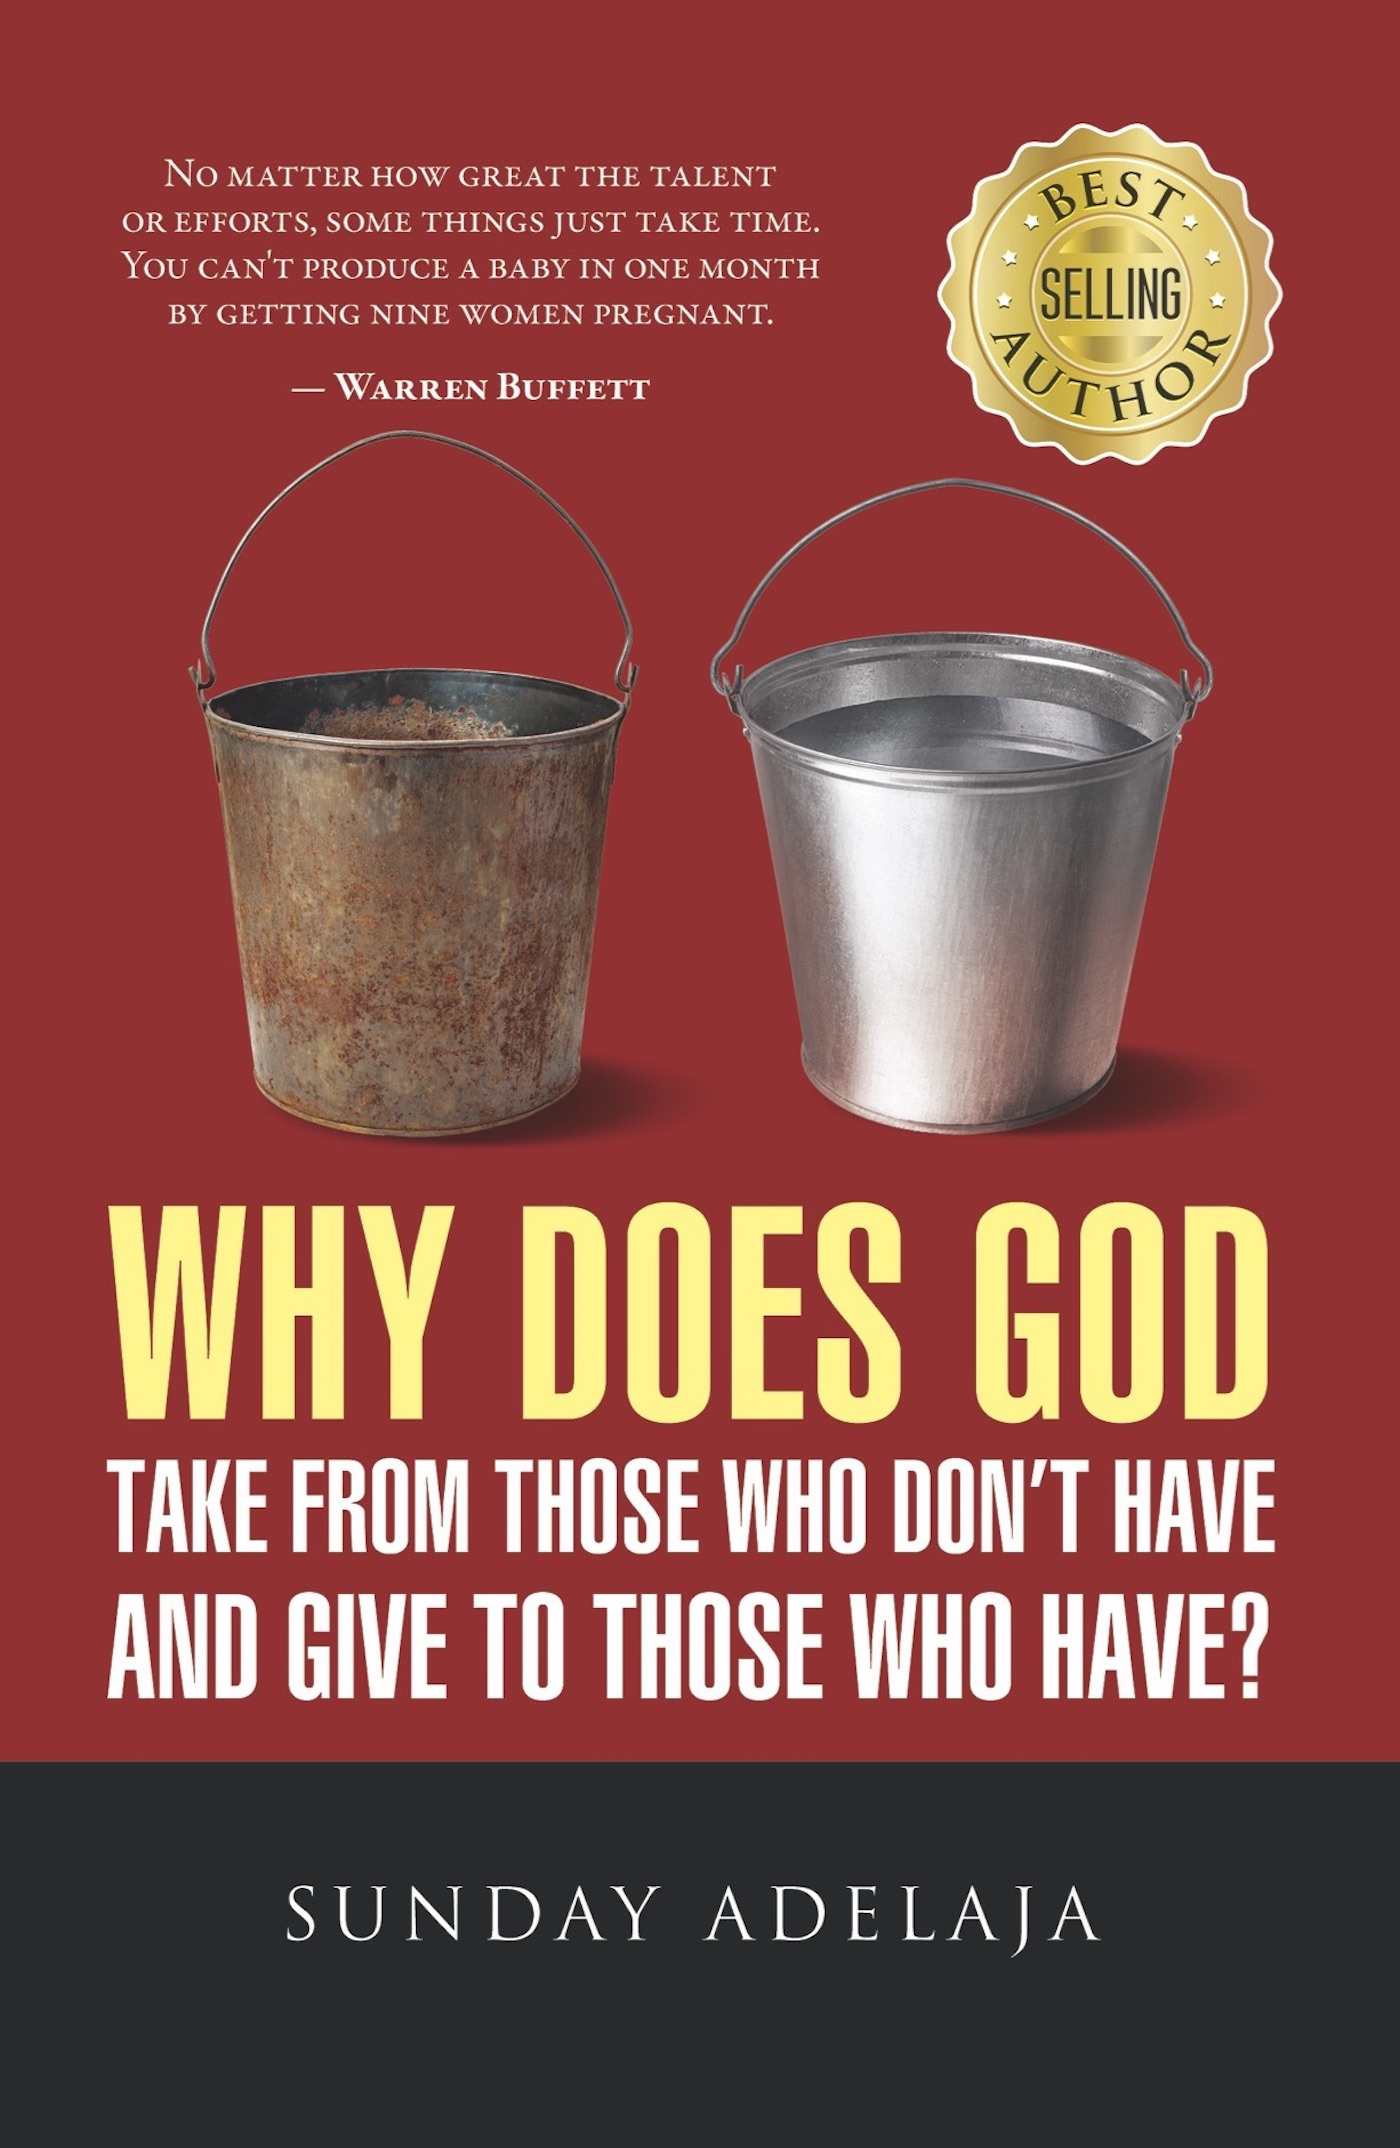 Why-Does-God-Take-From-Those-Who-Don’t-Have-And-Give-To-Those-Who-Have-